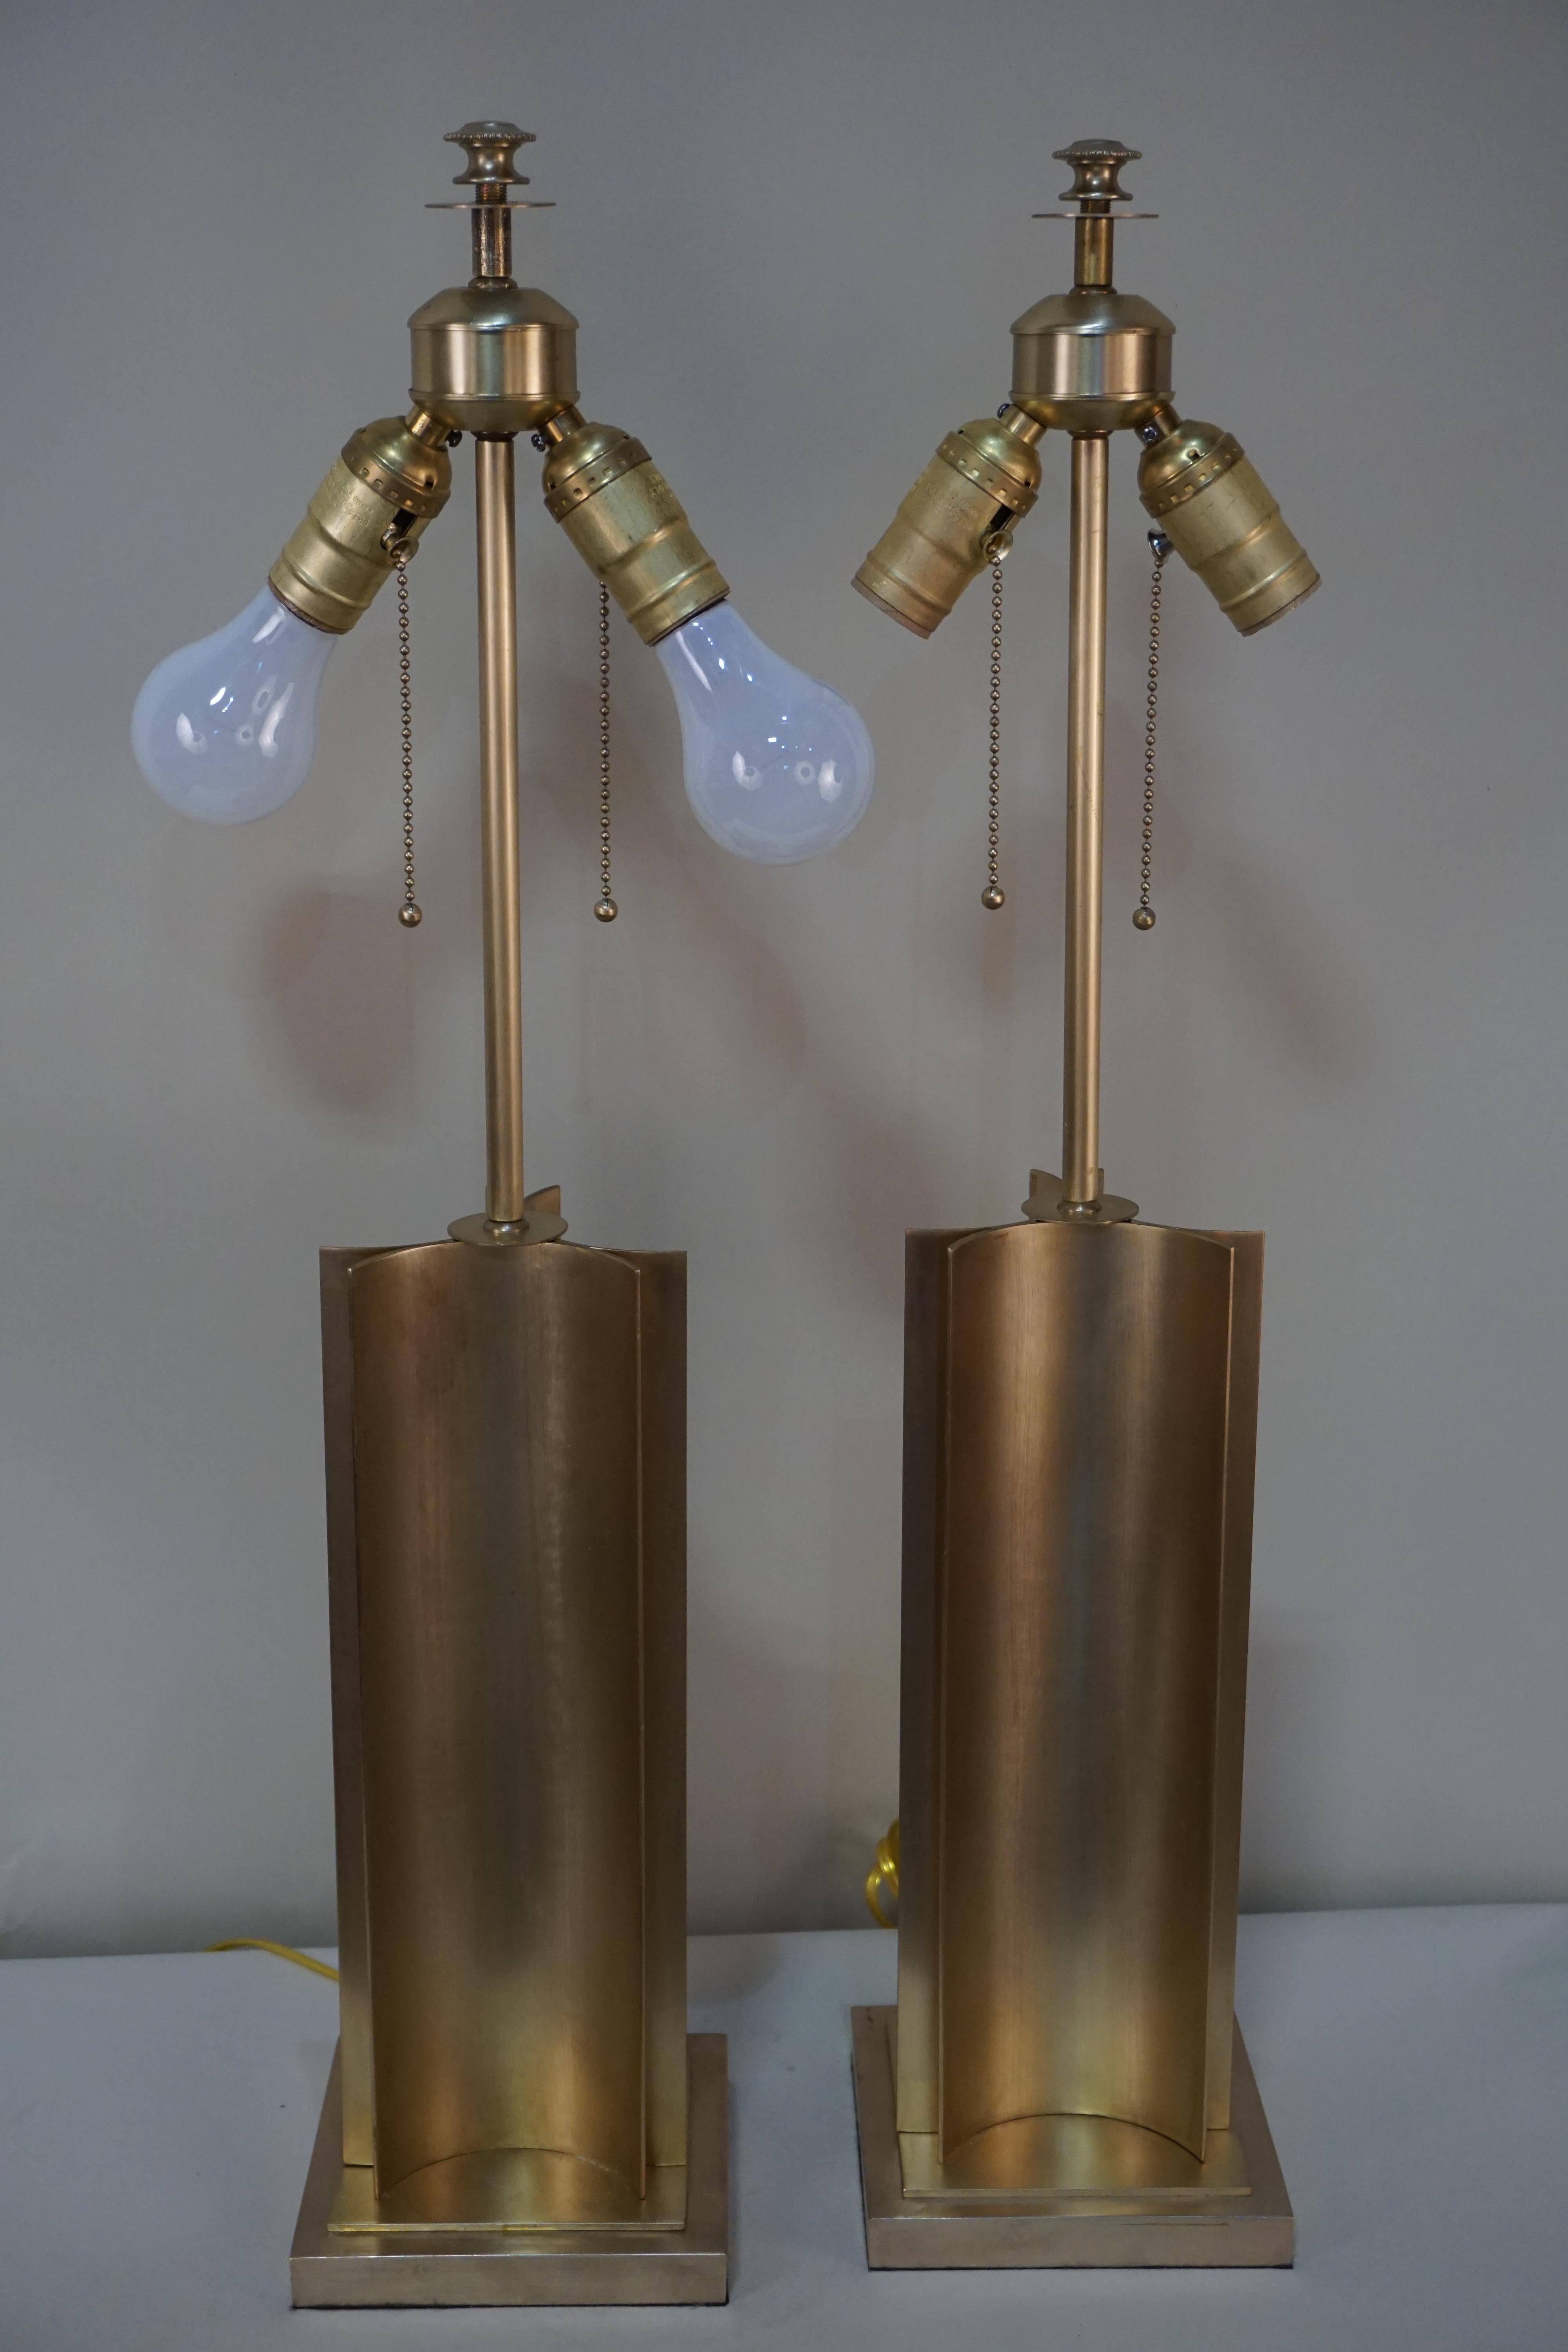 Simple but elegant pair of double light bronze table lamps.
Fitted with back-gold lining paper shades.